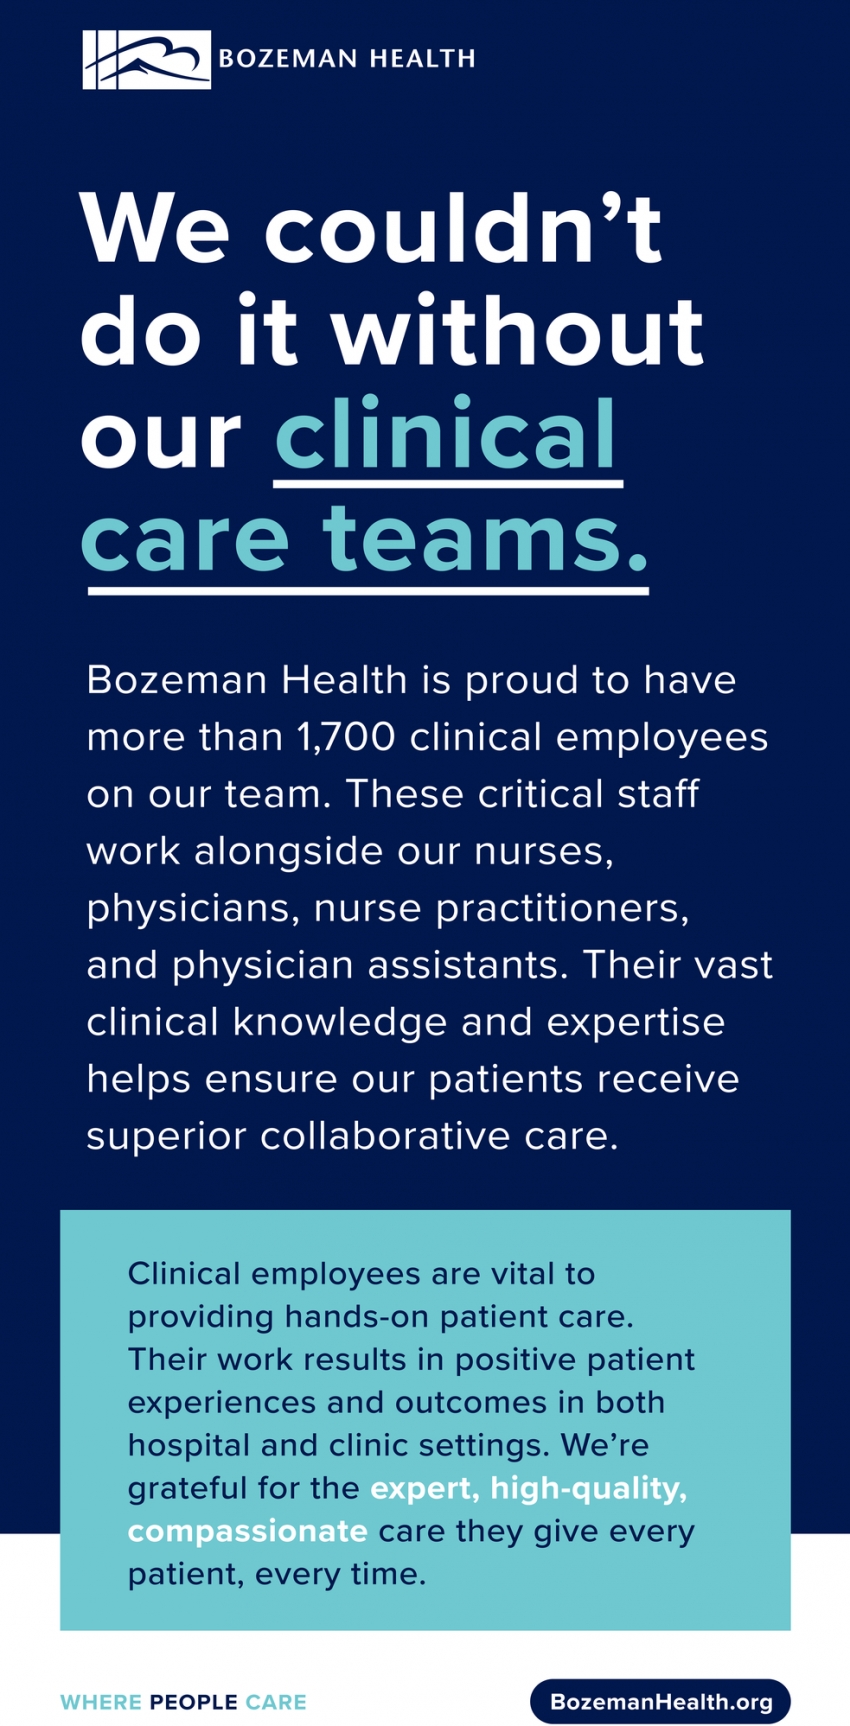 We Couldn't Do it Without Our Clinical Care Teams!